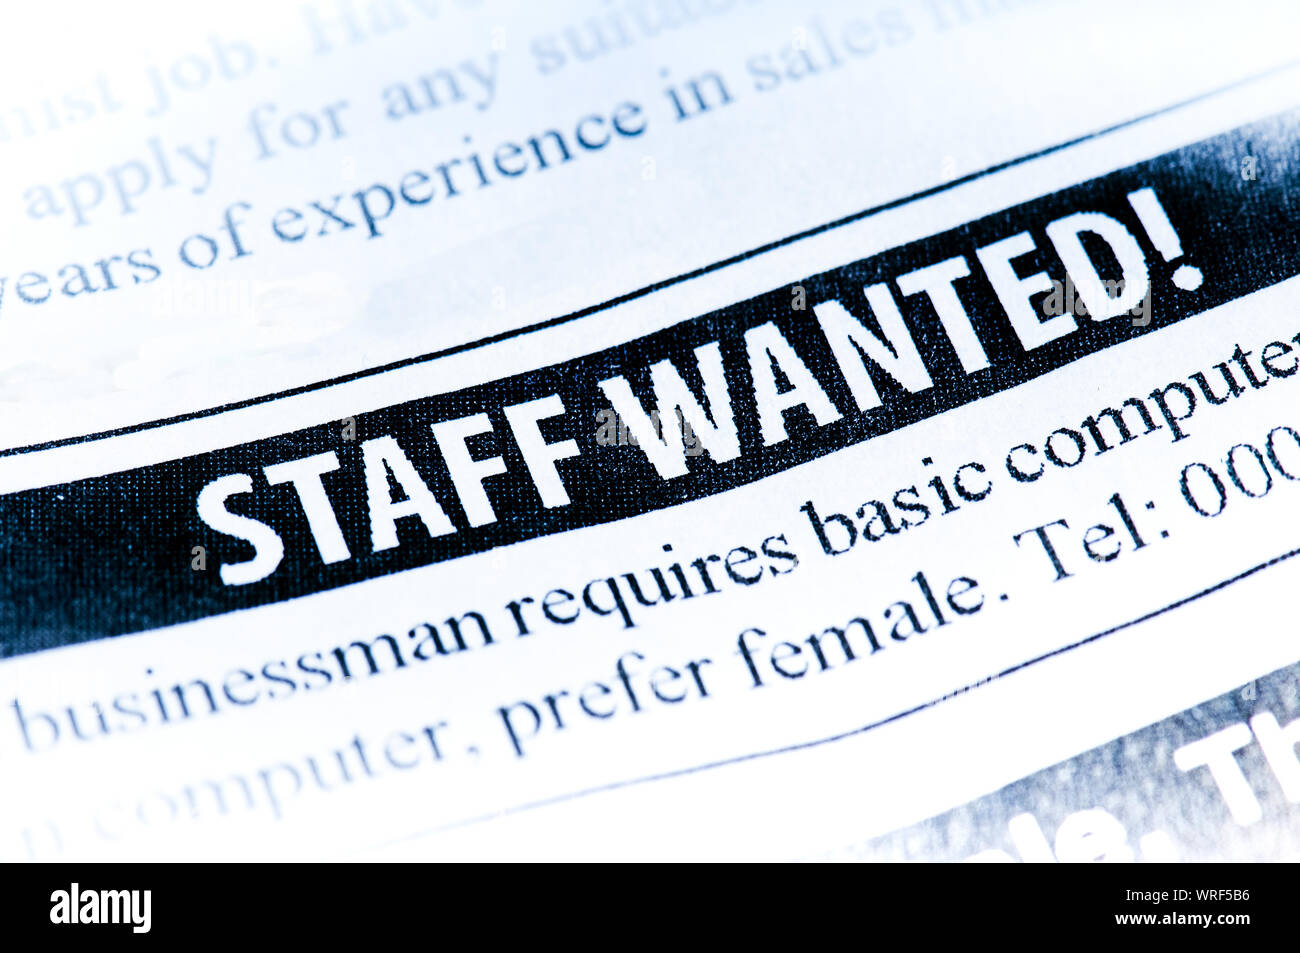 Staff Wanted newspaper classified ad Stock Photo